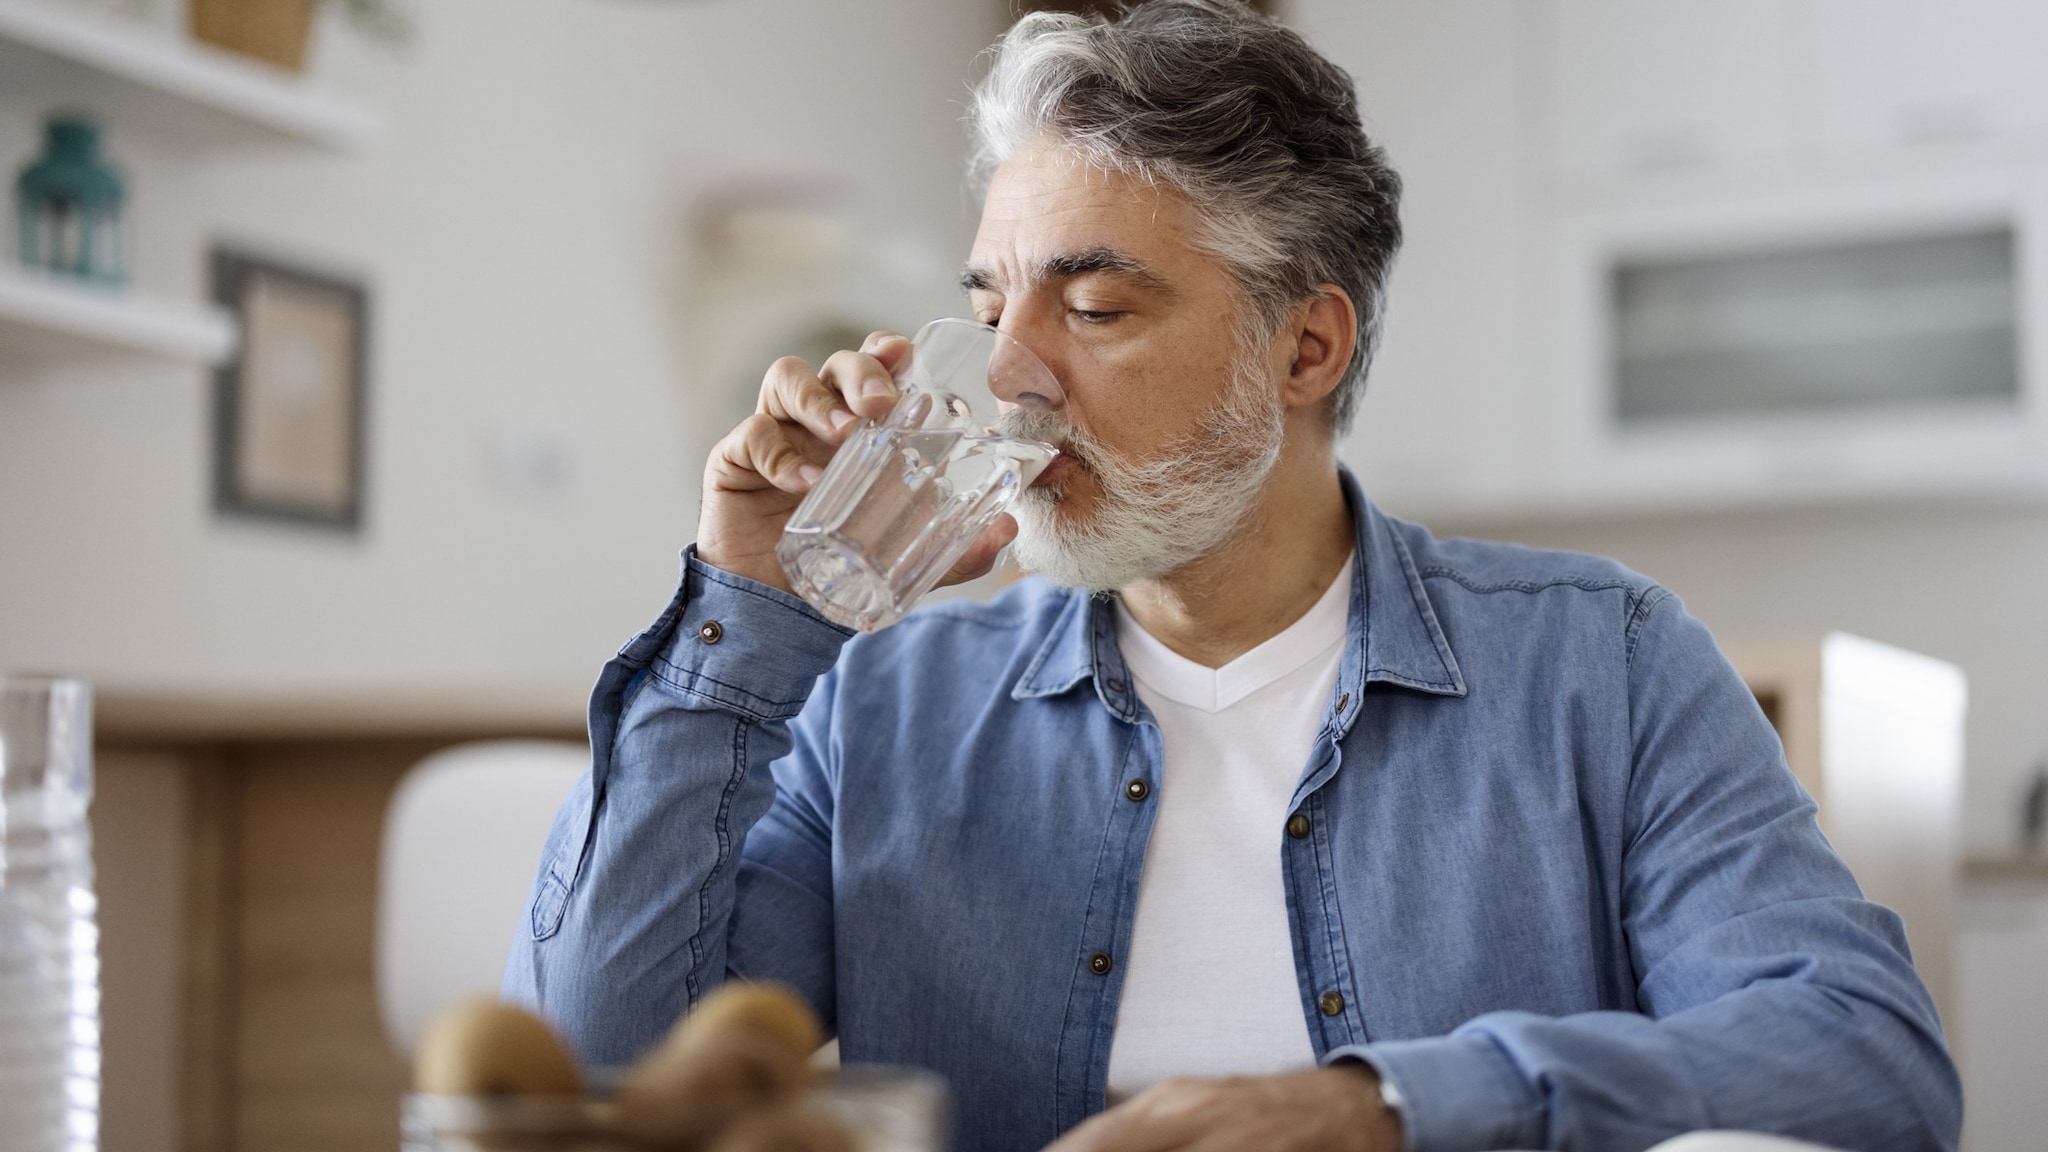 An older adult drinking a glass of water sitting down indoors.